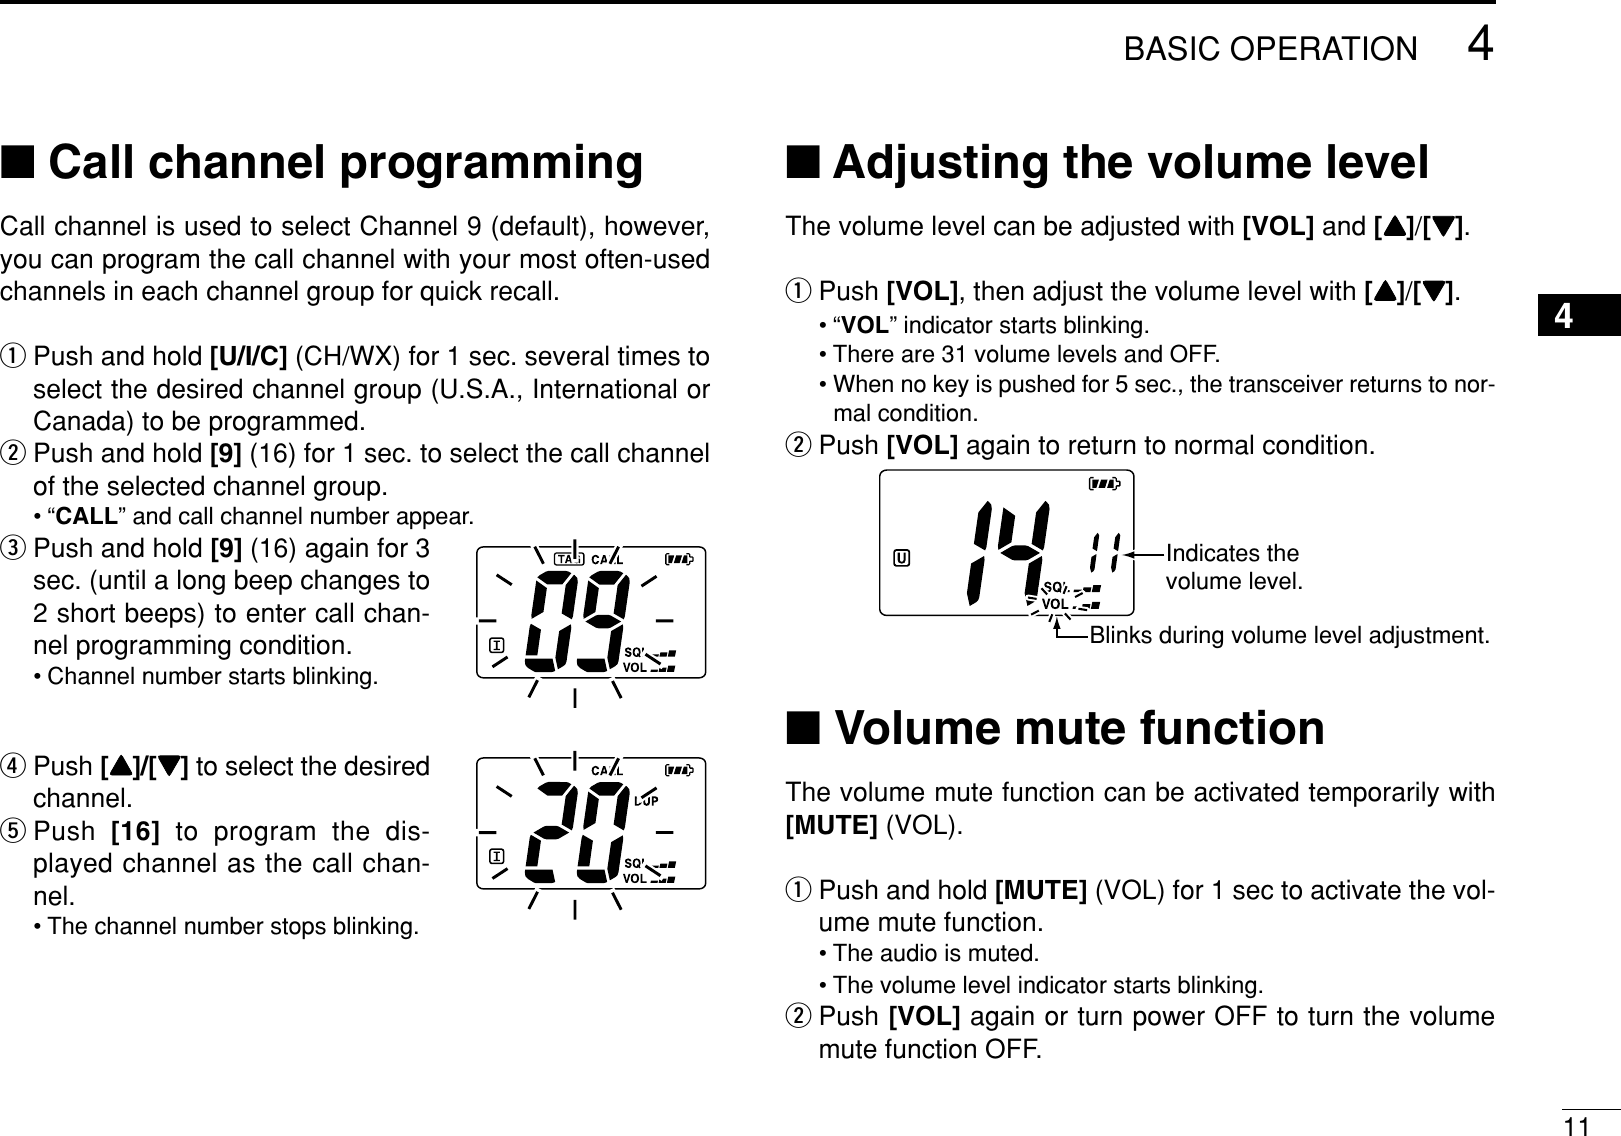 114BASIC OPERATION4■Call channel programmingCall channel is used to select Channel 9 (default), however,you can program the call channel with your most often-usedchannels in each channel group for quick recall.qPush and hold [U/I/C] (CH/WX) for 1 sec. several times toselect the desired channel group (U.S.A., International orCanada) to be programmed.wPush and hold [9] (16) for 1 sec. to select the call channelof the selected channel group.•“CALL” and call channel number appear.ePush and hold [9] (16) again for 3sec. (until a long beep changes to2 short beeps) to enter call chan-nel programming condition.• Channel number starts blinking.rPush [Y]/[Z]to select the desiredchannel.tPush [16] to program the dis-played channel as the call chan-nel.• The channel number stops blinking.■Adjusting the volume levelThe volume level can be adjusted with [VOL] and [Y]/[Z].qPush [VOL], then adjust the volume level with [Y]/[Z].•“VOL” indicator starts blinking.• There are 31 volume levels and OFF.• When no key is pushed for 5 sec., the transceiver returns to nor-mal condition.wPush [VOL] again to return to normal condition.■Volume mute functionThe volume mute function can be activated temporarily with[MUTE] (VOL).qPush and hold [MUTE] (VOL) for 1 sec to activate the vol-ume mute function.• The audio is muted.• The volume level indicator starts blinking.wPush [VOL] again or turn power OFF to turn the volumemute function OFF.Indicates the volume level.Blinks during volume level adjustment.